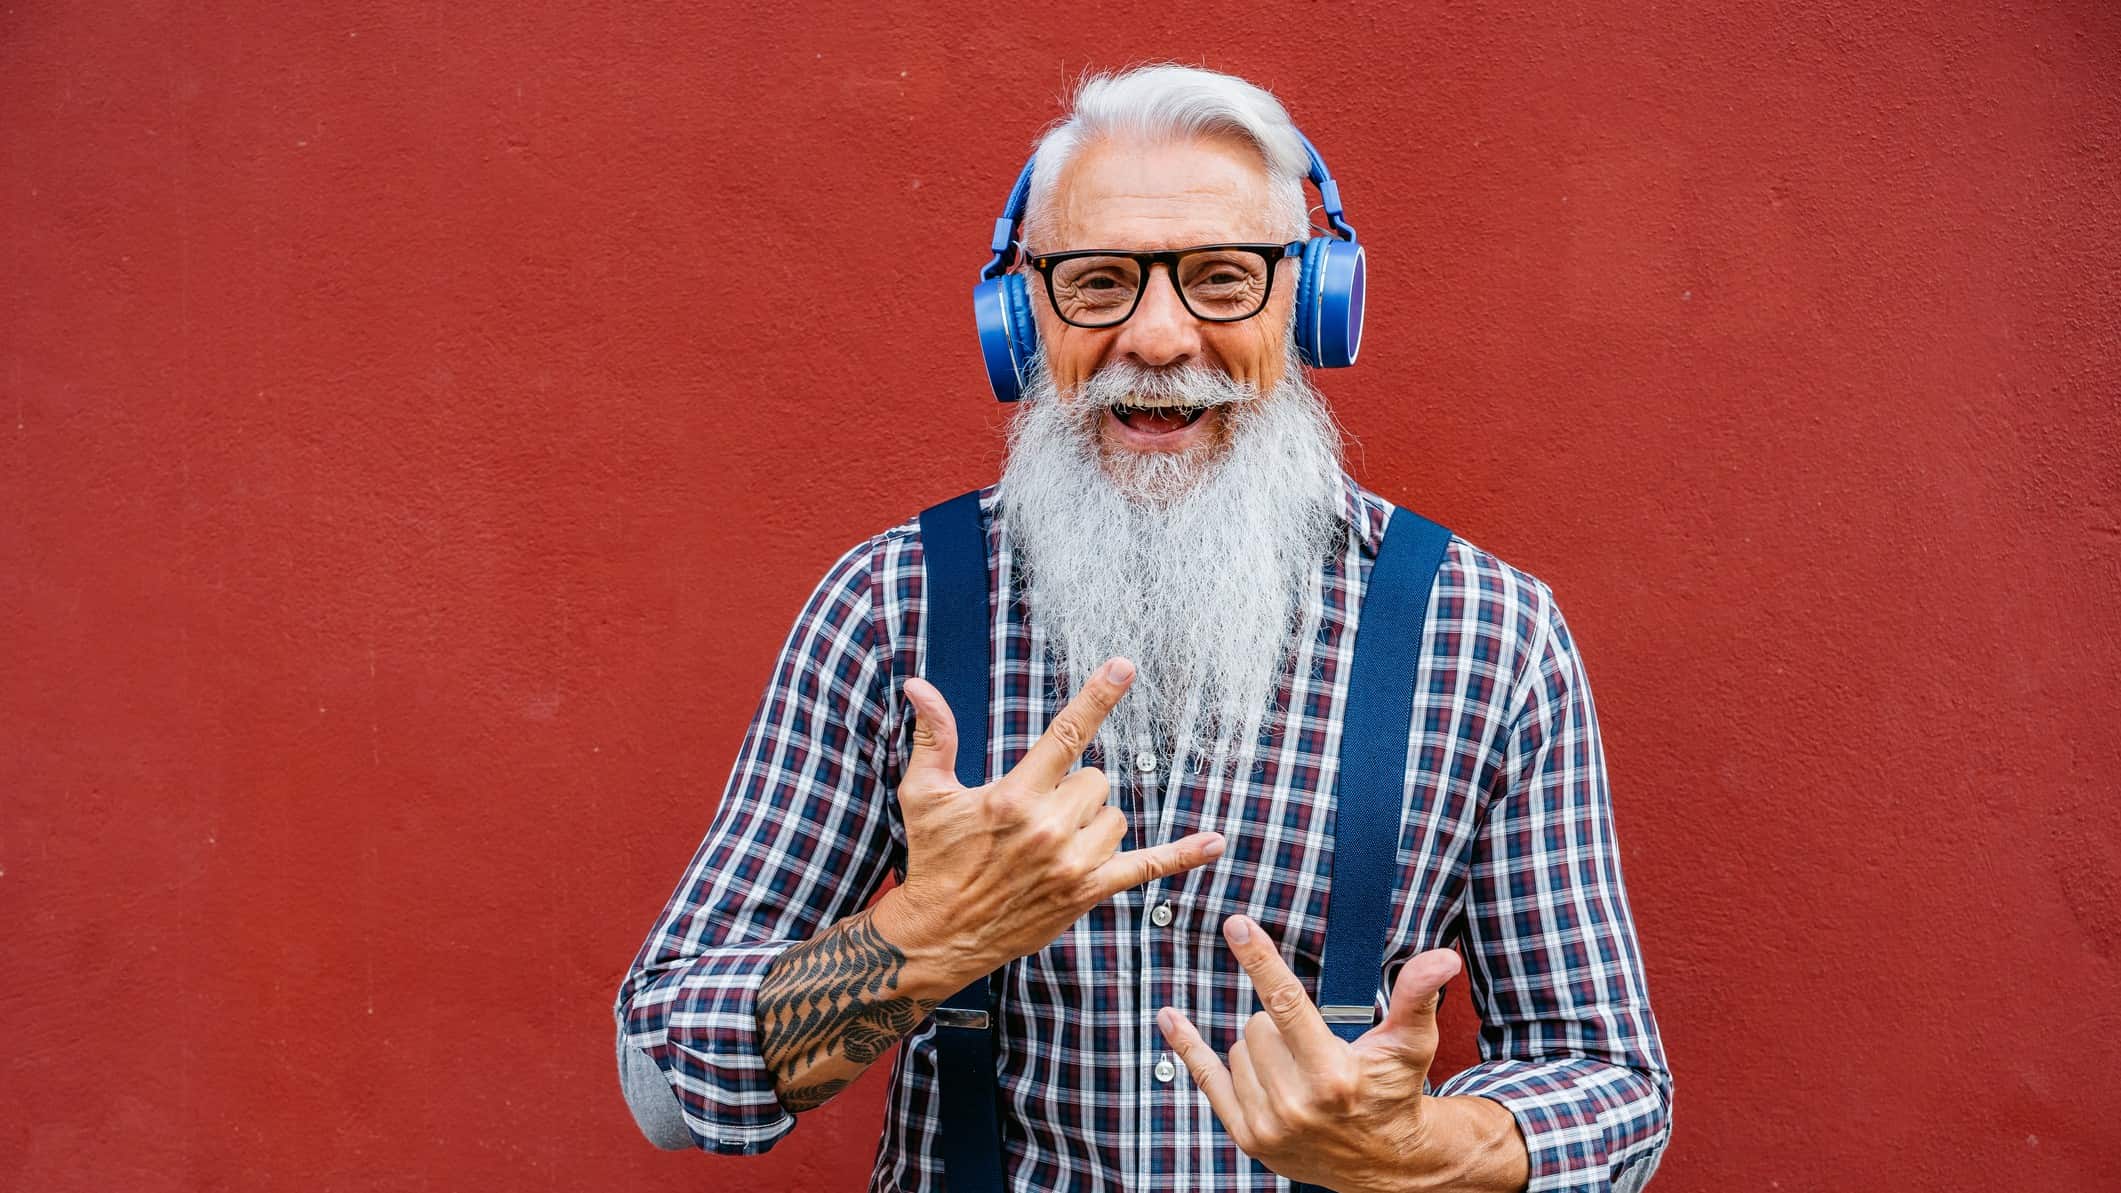 A trendy older hipster guy with a long white beard and headphones pulls rockstar hand sign with his hands.